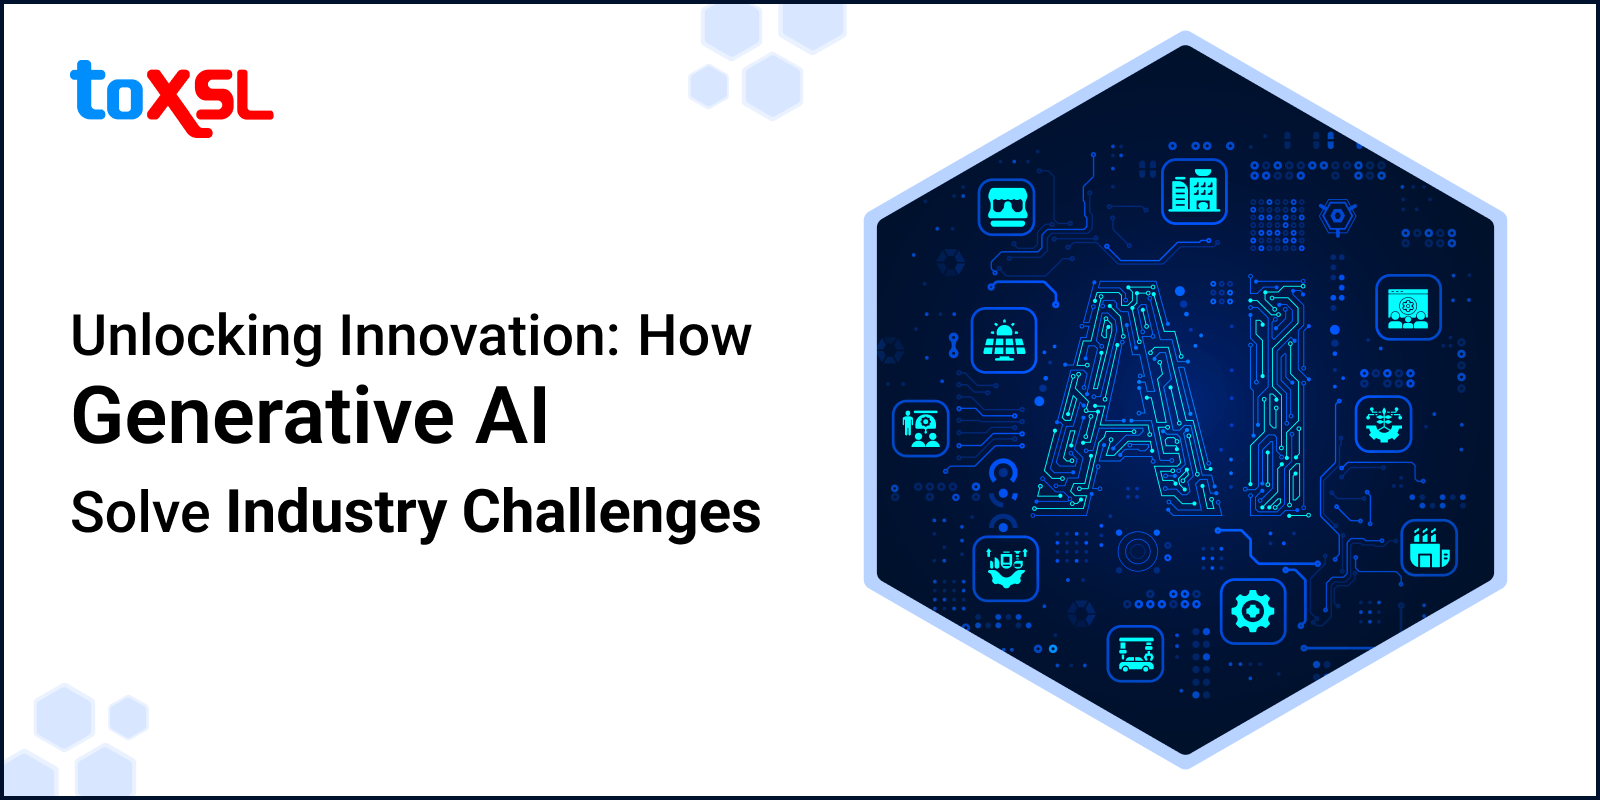 Unlocking Innovation: How Generative AI Solve Industry Challenges